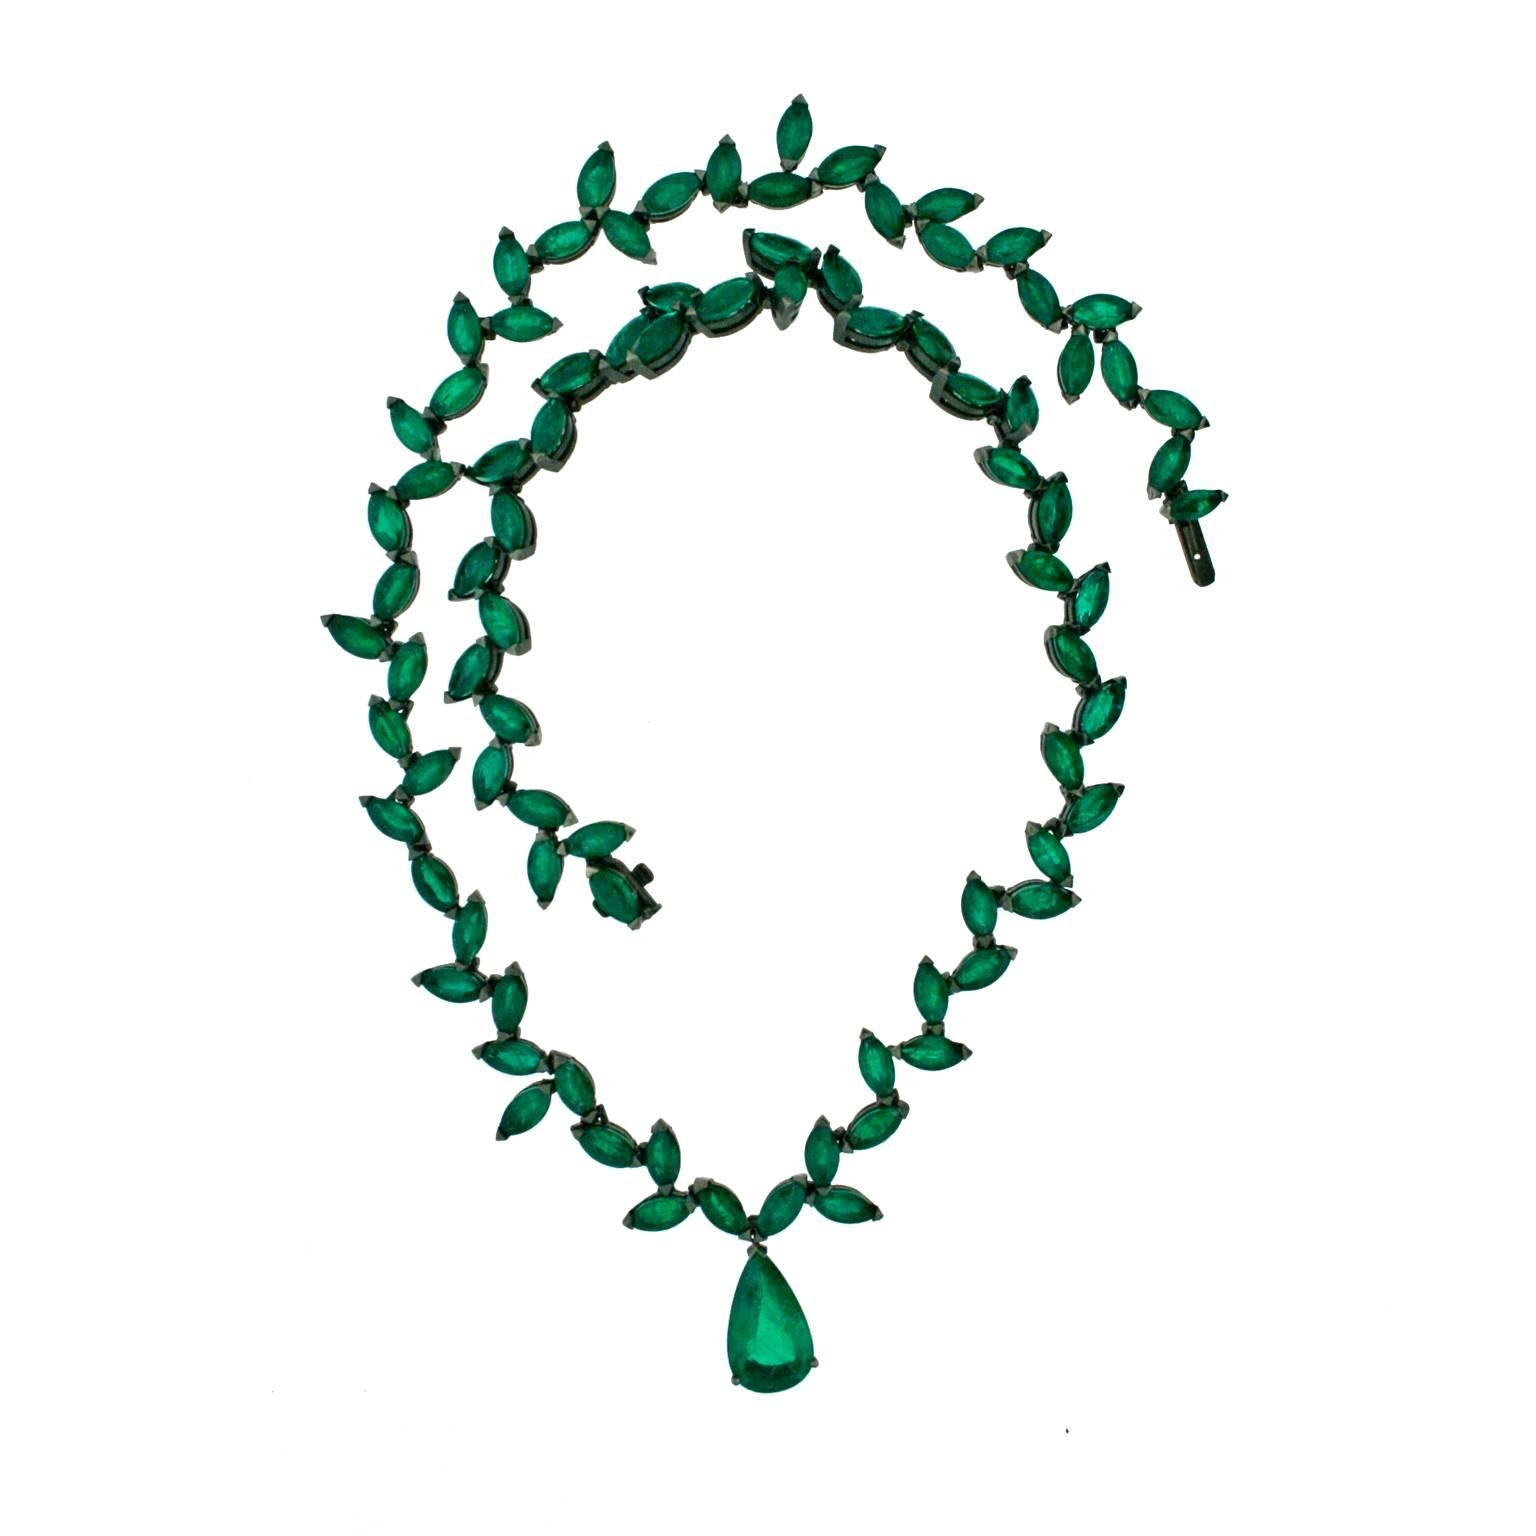 Old Fashioned Necklace from the Stoned collection with marquise emeralds set in 18ct white gold with matt black rhodium finish.
Box clasp with emerald and safety catch at back of necklace. 
Pear Shaped emerald focal point 5.36ct certified by The